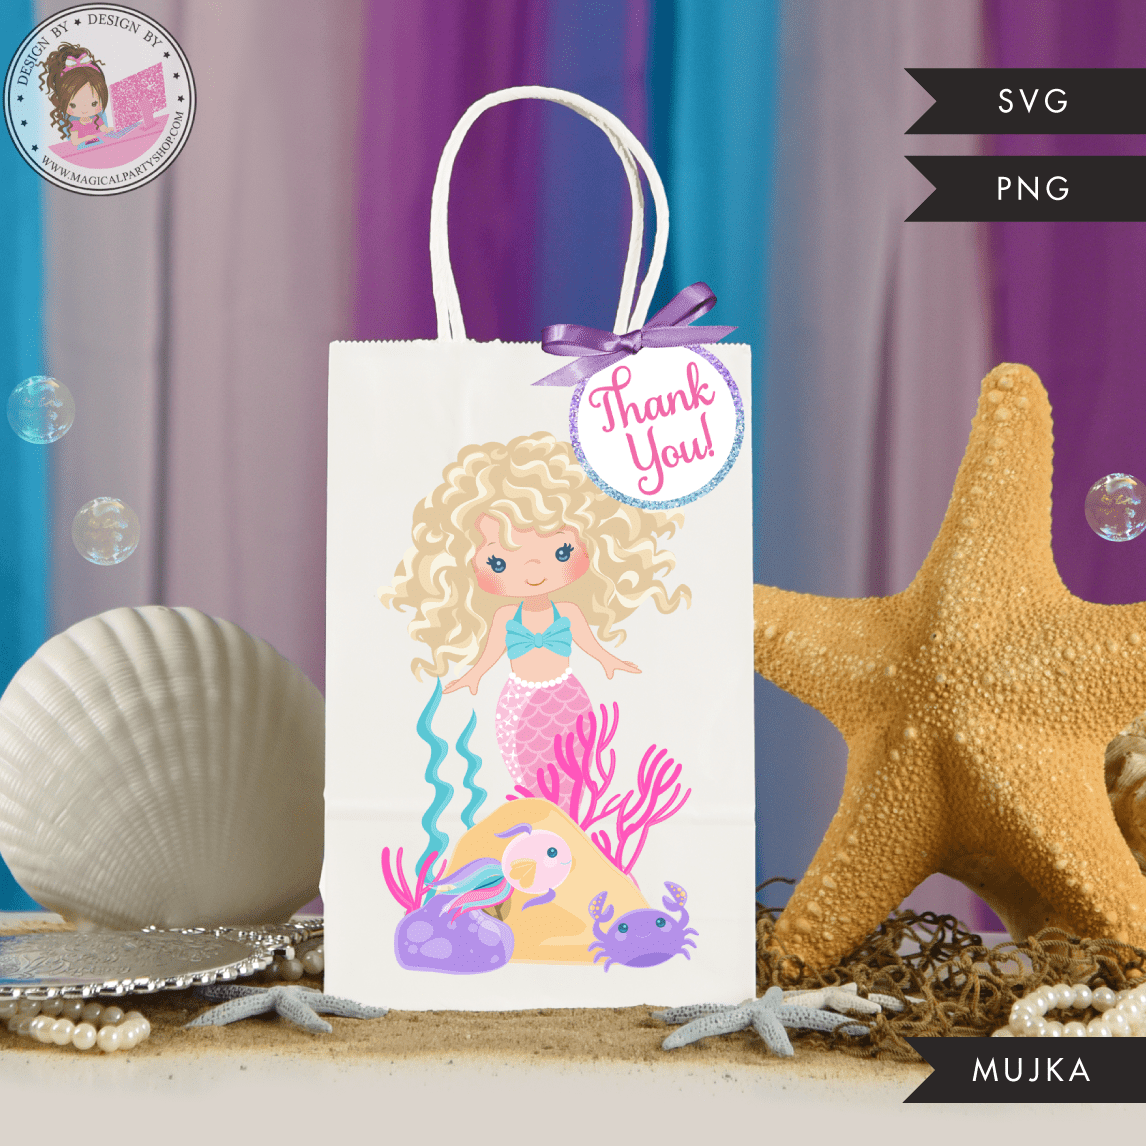 Mermaid Birthday Gift bag and Thank you tags SVG, PNG cutting and print files. Curly Blonde Rainbow mermaid graphics for Cricut, Silhouette